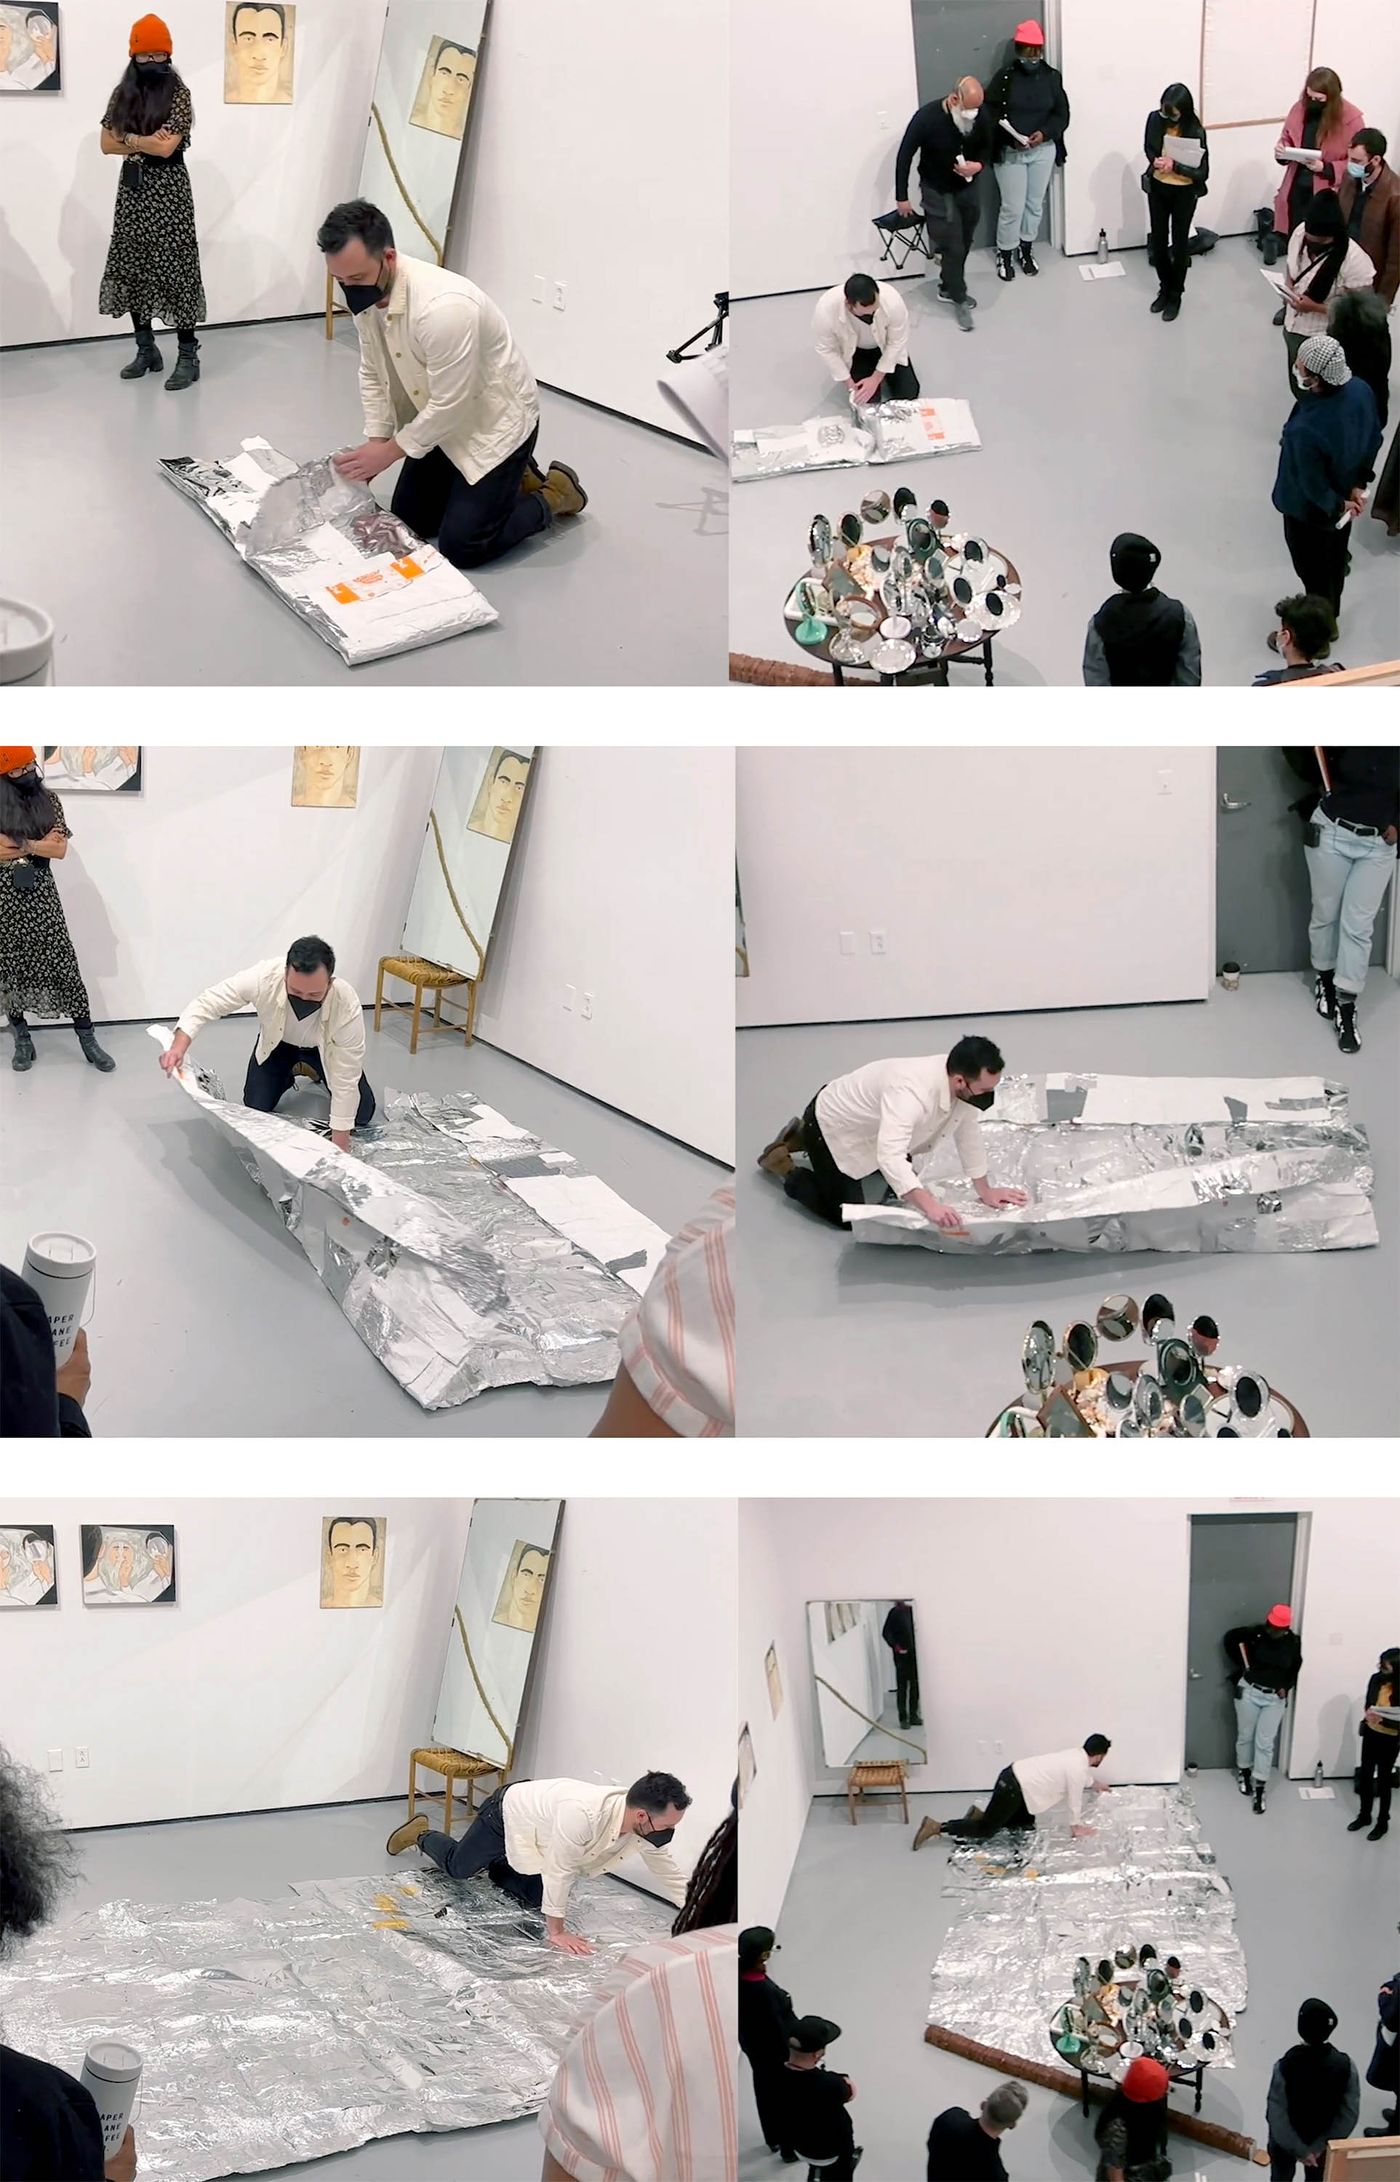 Video stills of Unfolding Performance II, with Folded Piece II, 2022. Foils, reflective papers, tape, one-minute duration. Video: Bhasha Chakrabarti & Alex Puz.